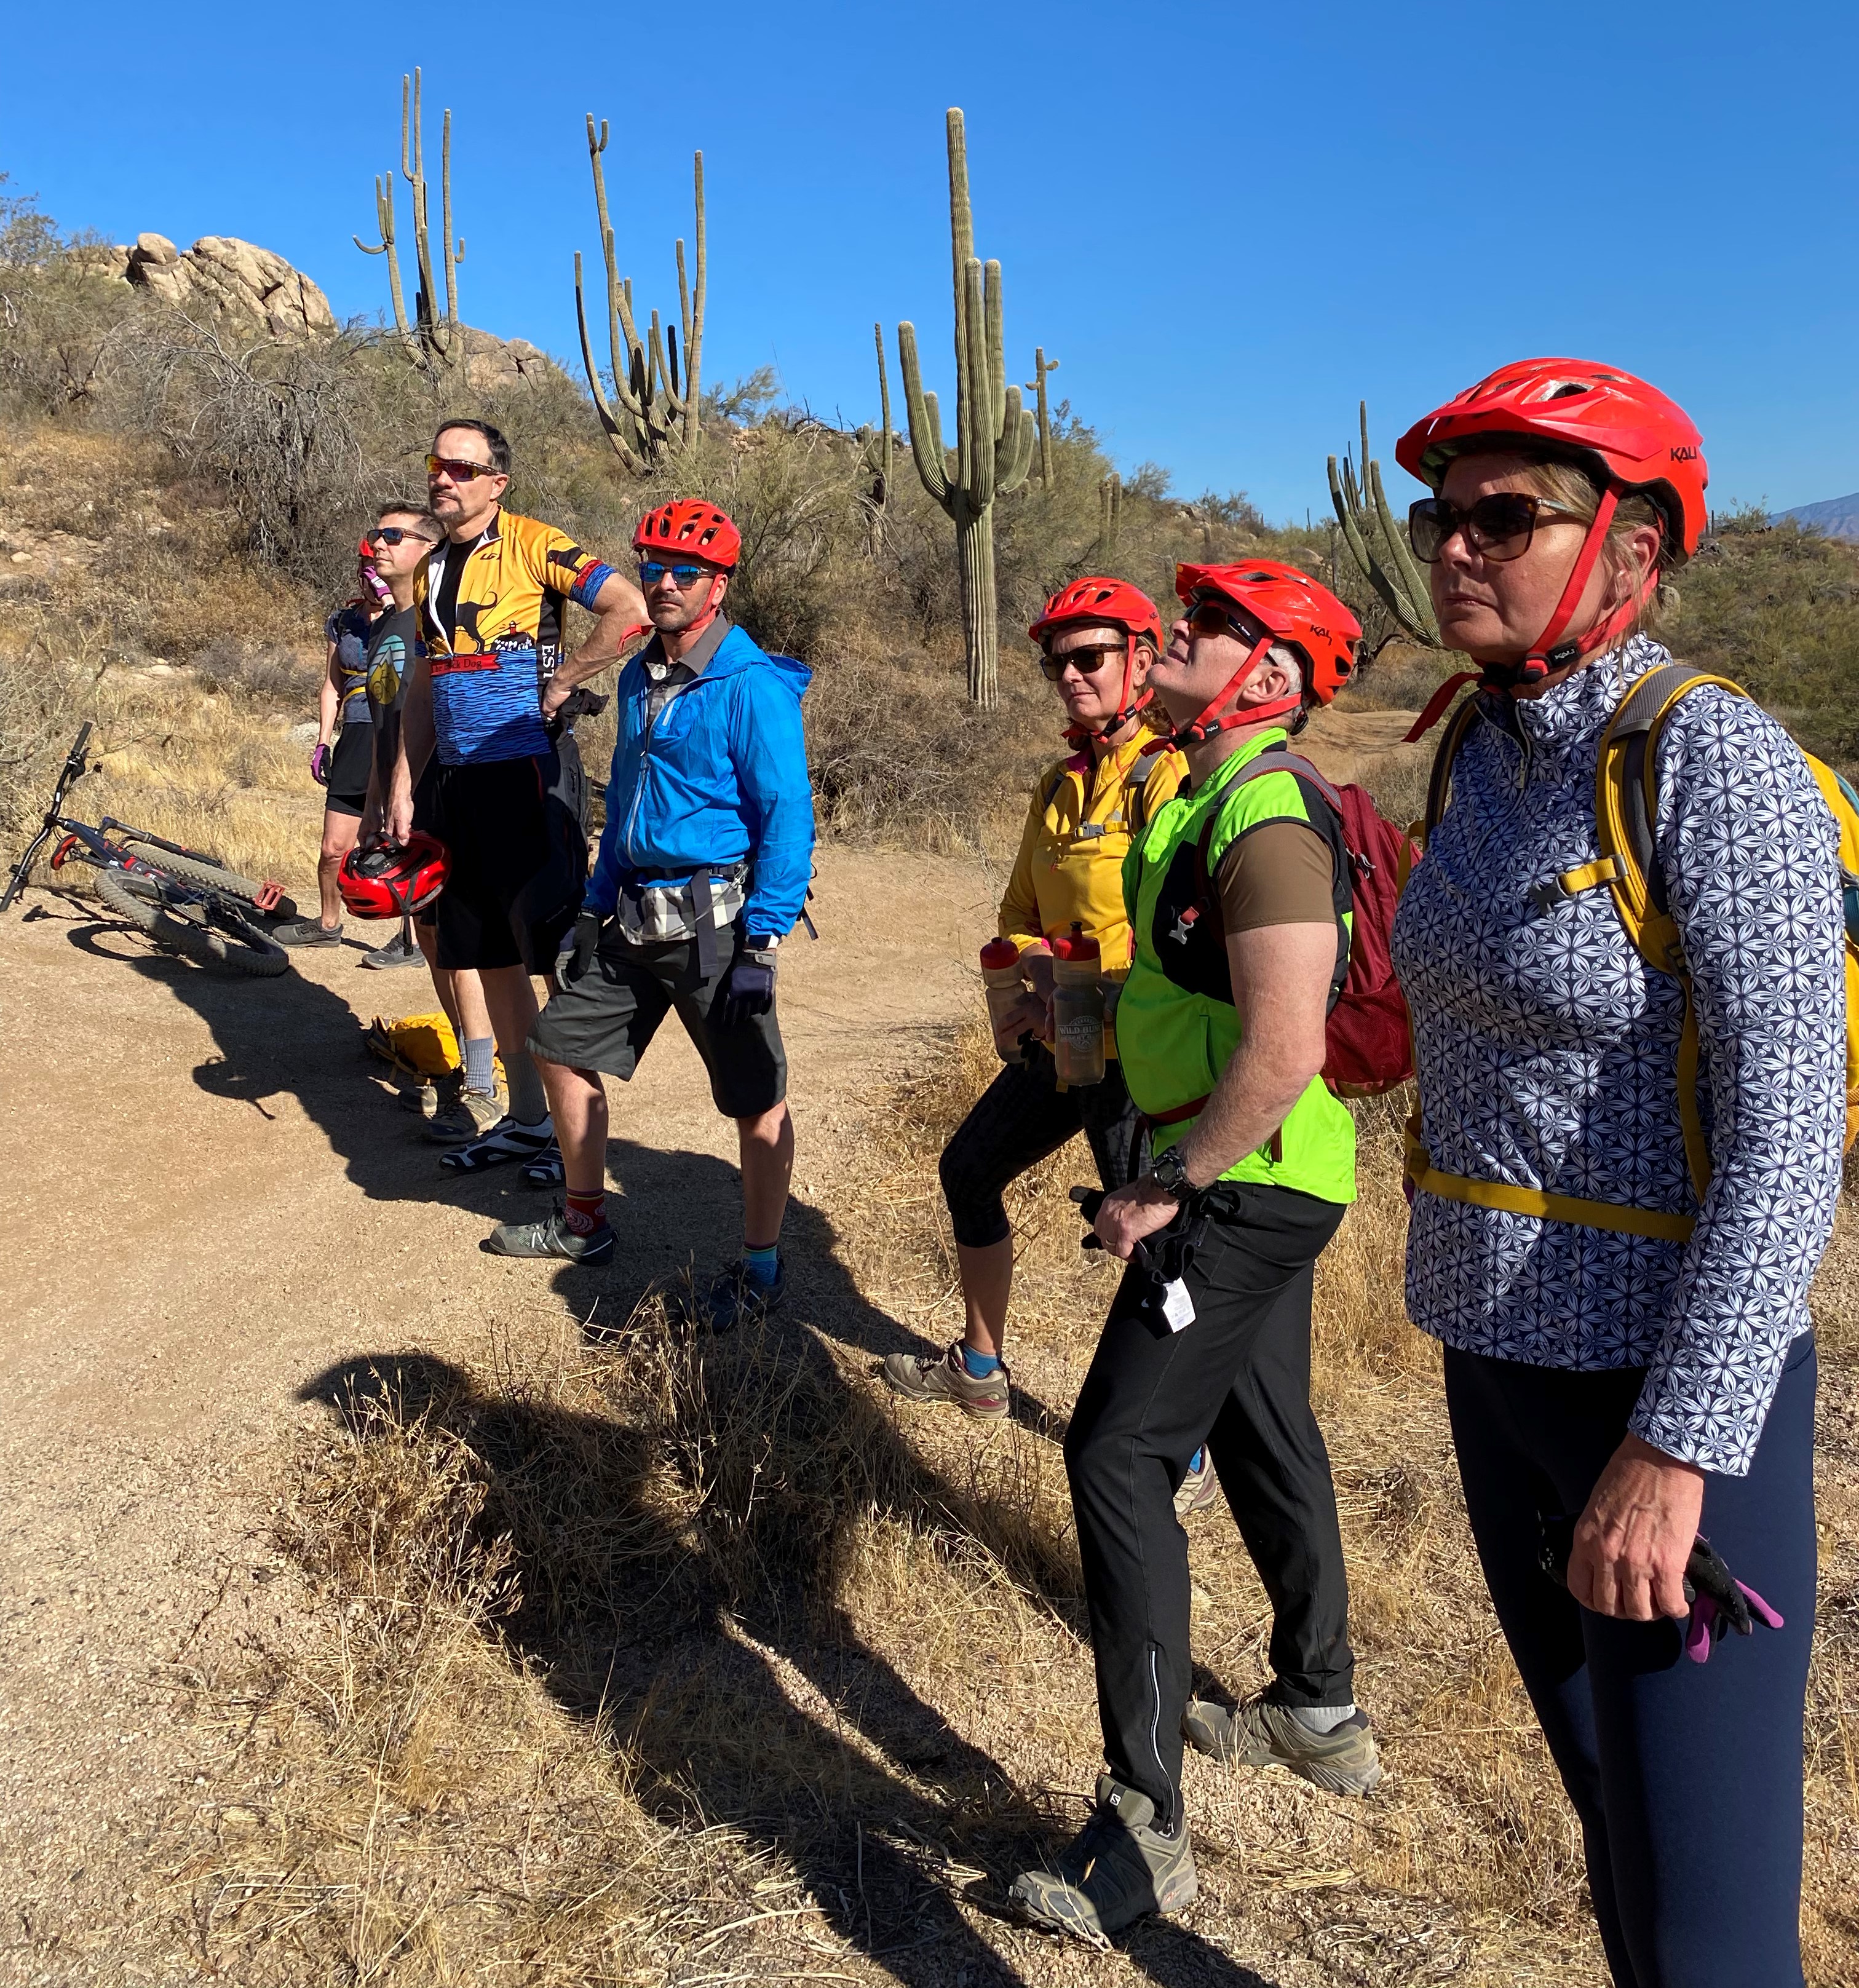 While looking over an iconic Saguaro Cactus, the 2019 Heinly group of friends listens intently to their Wild Bunch guide during a Phoenix mountain biking tour. From left to right: Michelle Davis, Mike Kuczala, Chris Heinly, Scott Davis, Noel Garapola, Joe Garapola and Cyndy Kuczala.